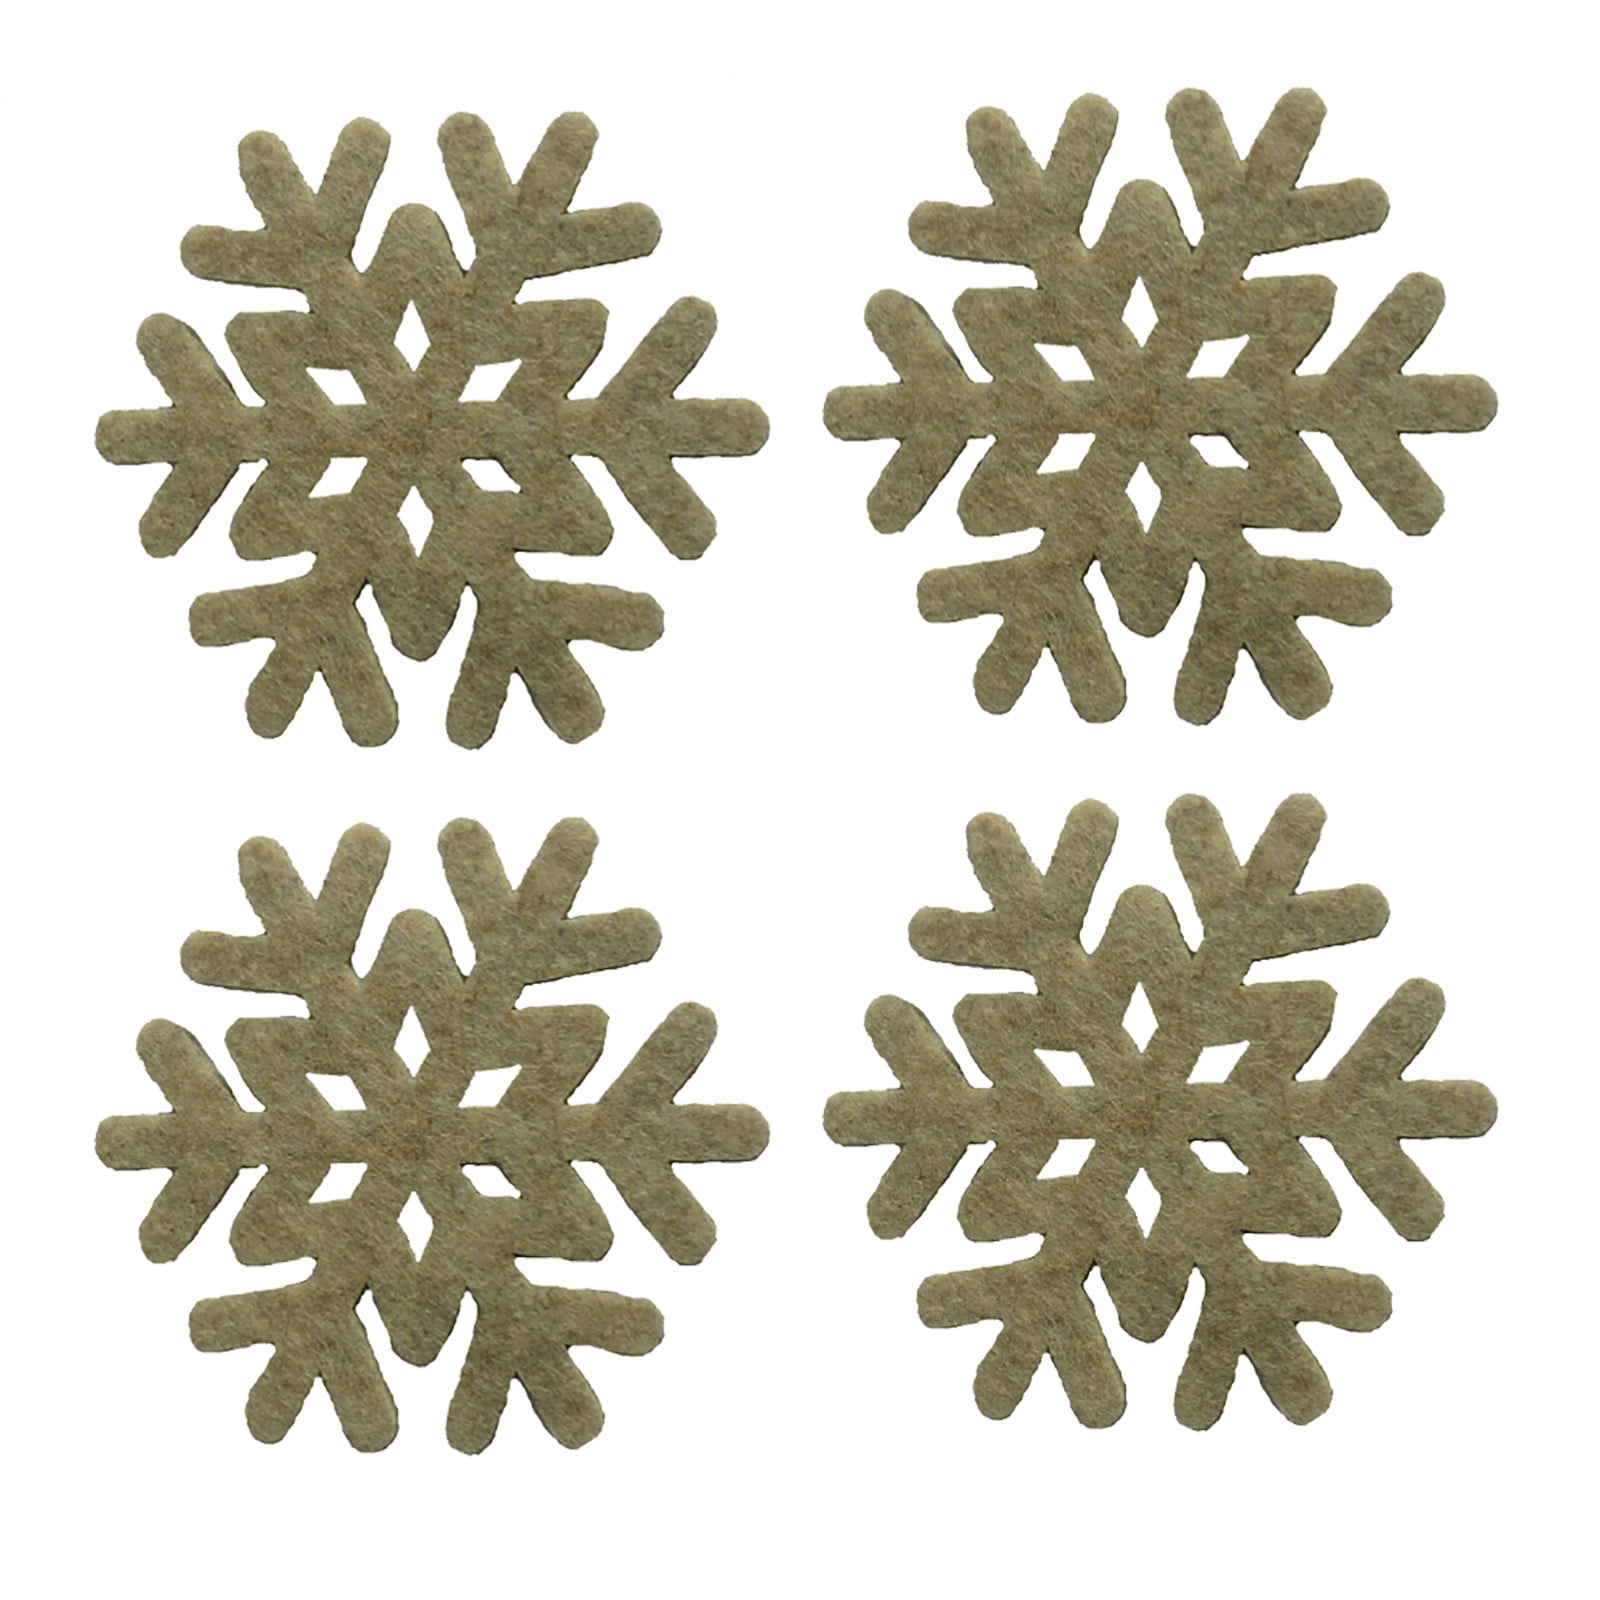 4 Pcs Snowflake Design Cork Coasters Drink Coffee Tea Cup Mat Pad For Home S